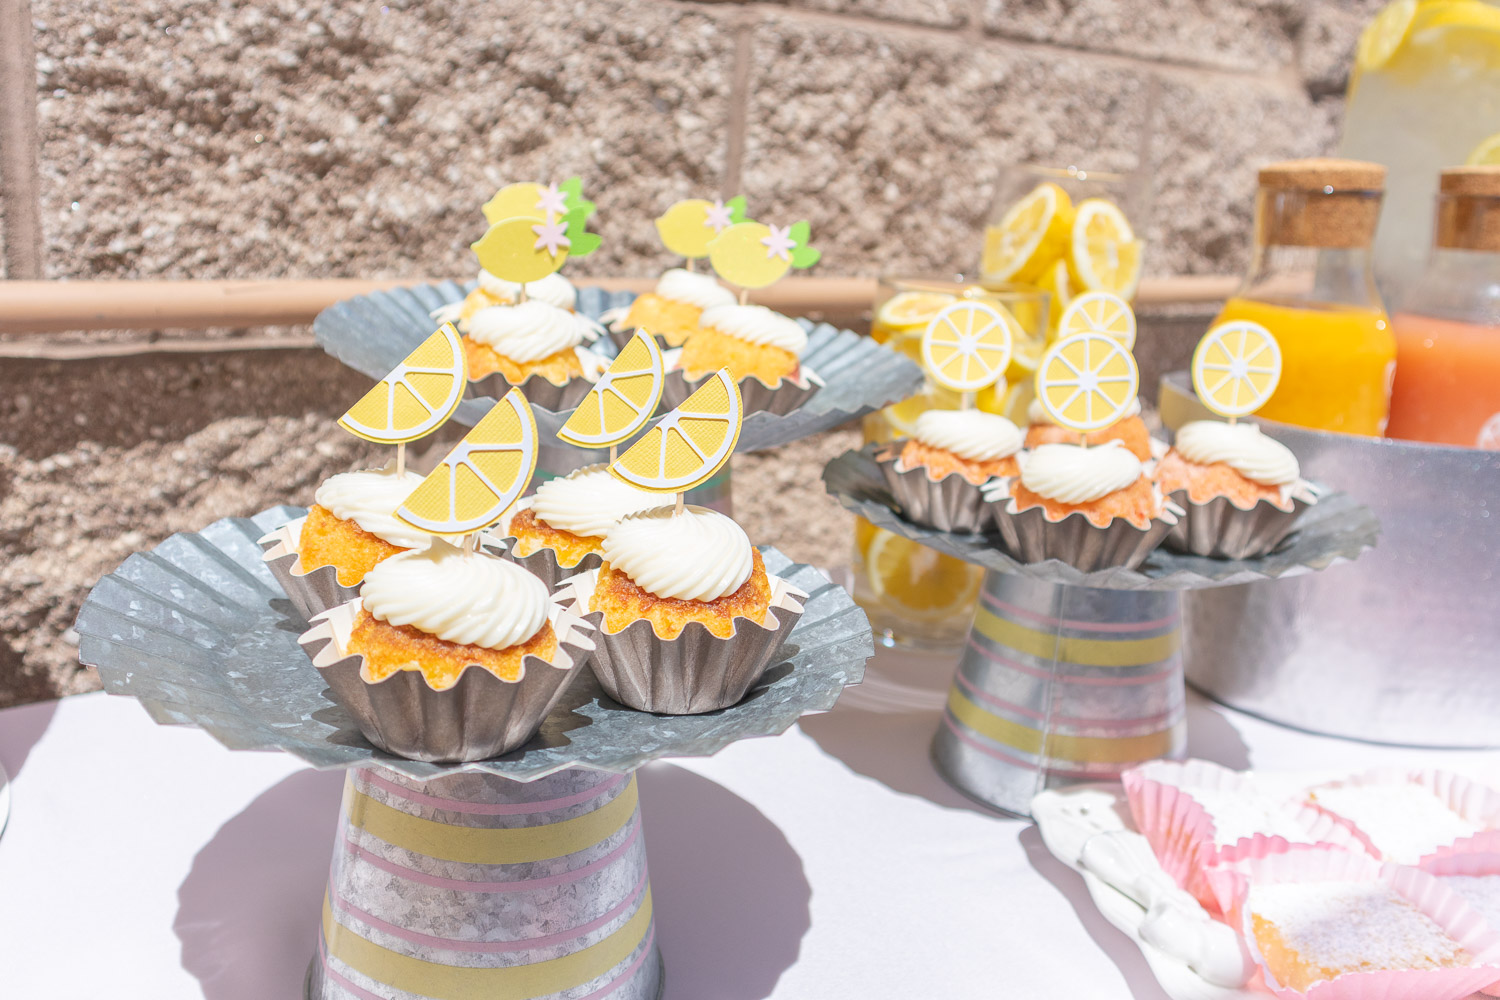 Tiny bundt cakes with paper lemon toppers. They're placed on metal cake stands of different heights.